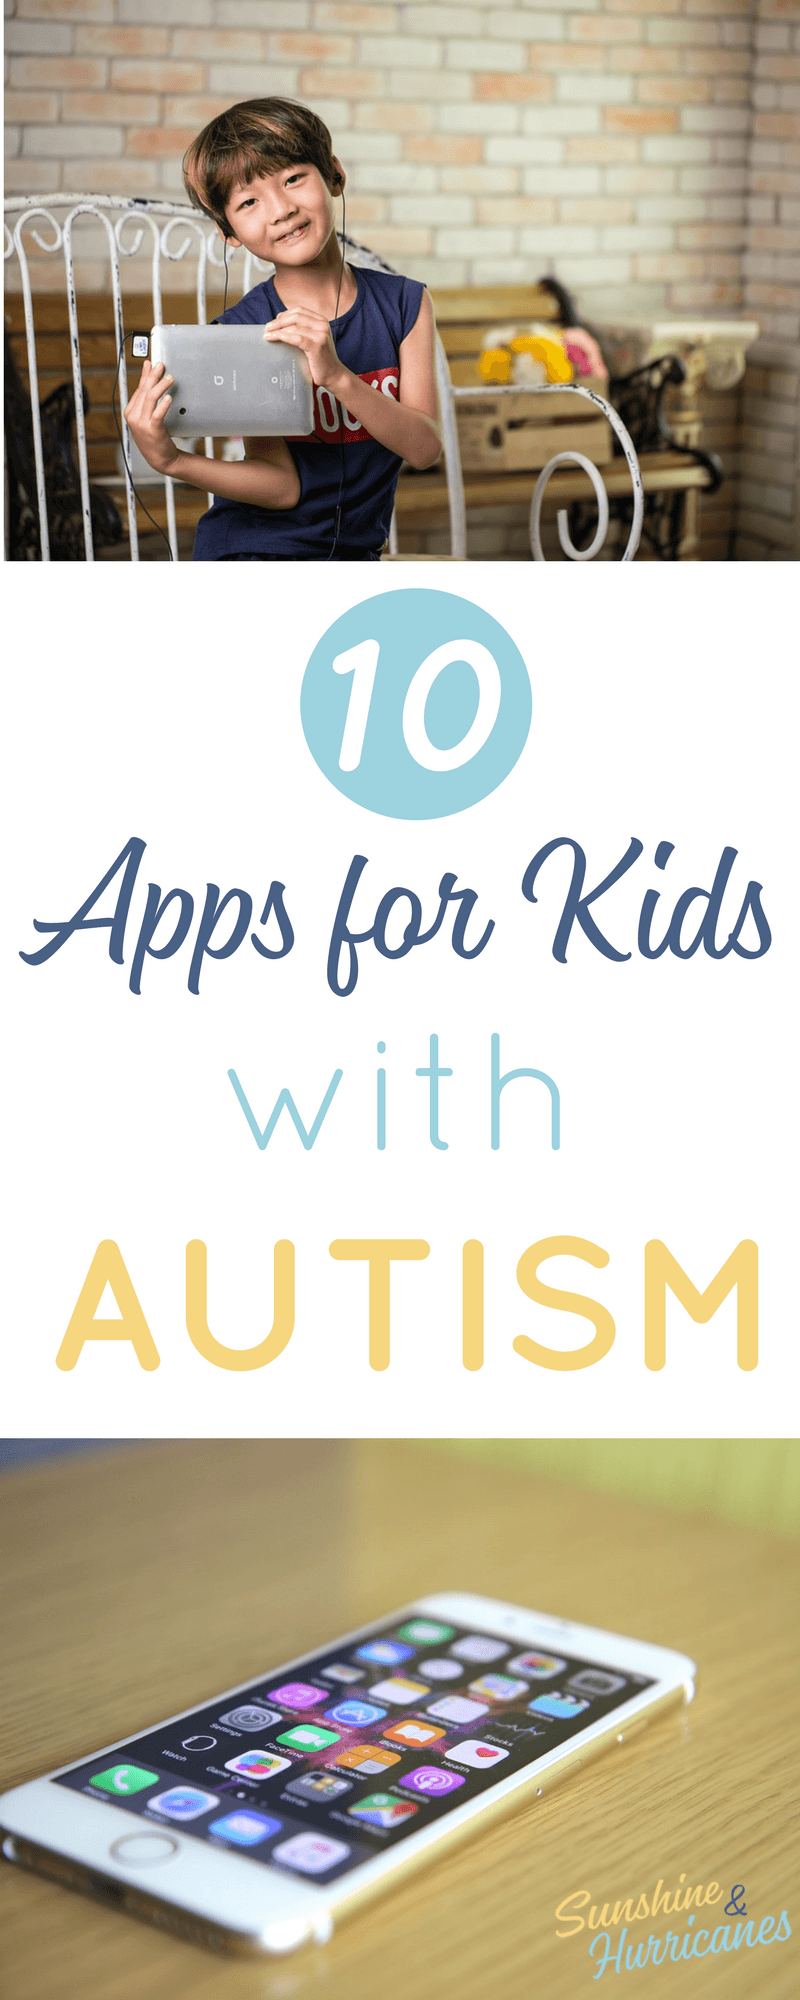 When raising a child on the autism spectrum, today's technology can be a powerful tool for parents, educators and therapist. These 10 Autism Apps are highly rated and can help autistic children with a number of challenges they face. Autism| Autism Apps| Apps for Kids| Special Needs|Apps for Kids with Special Needs